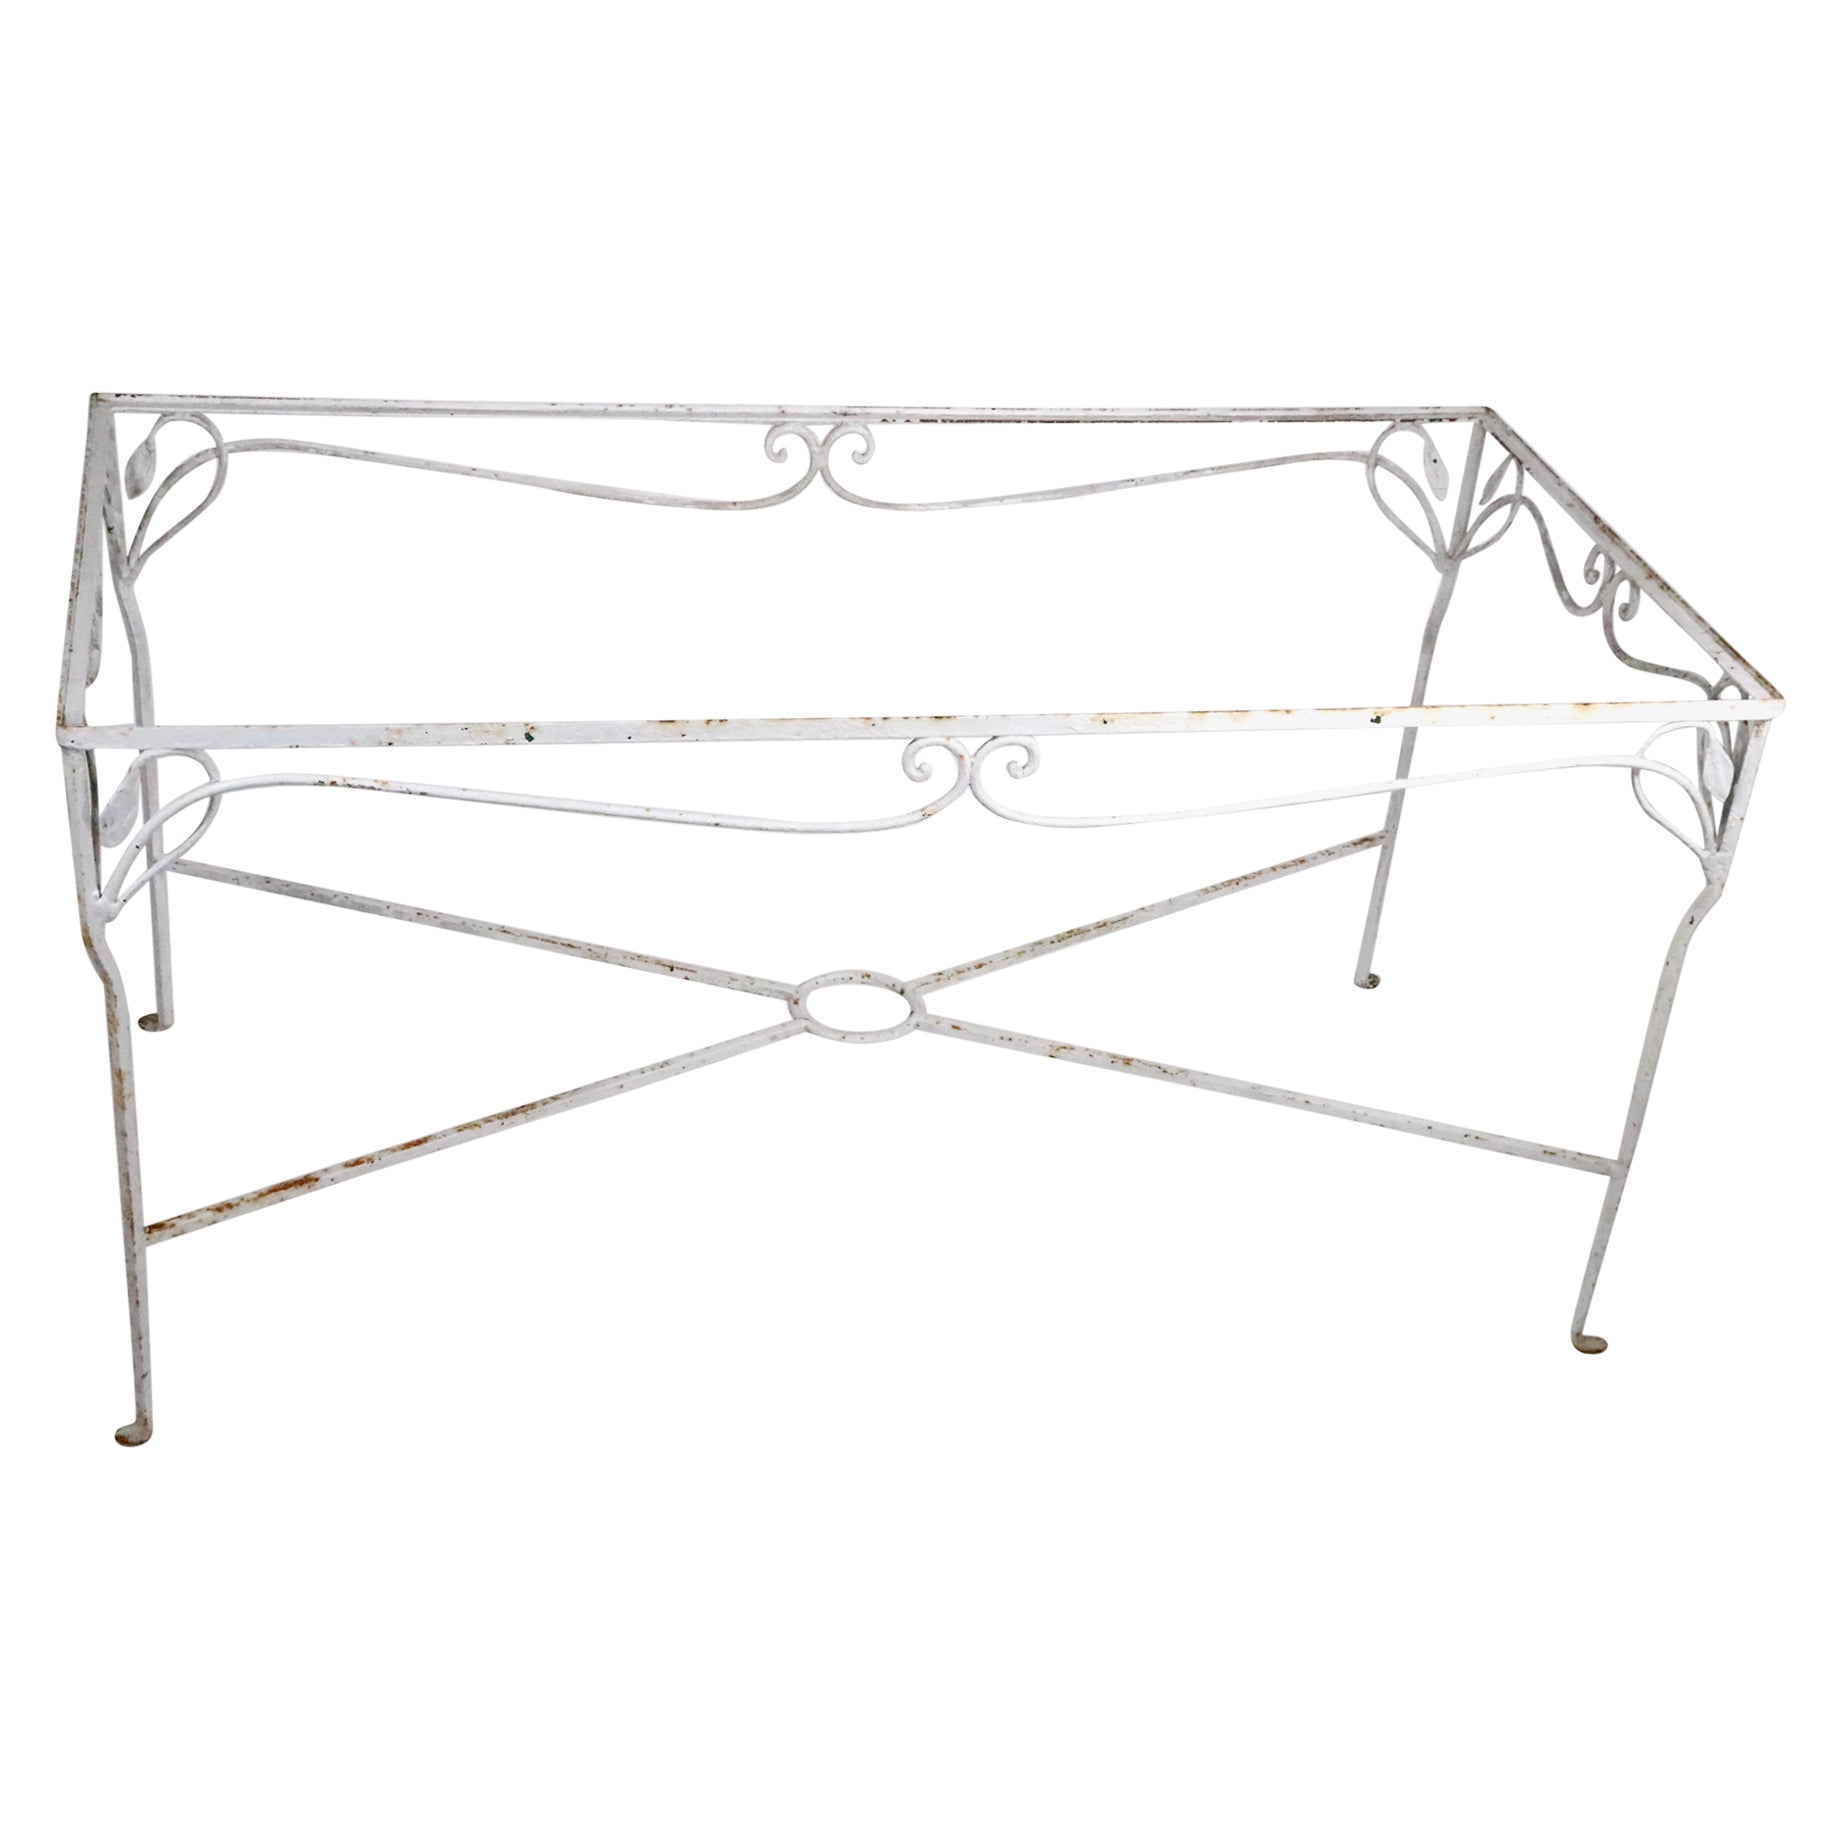 Wrought Iron Garden Patio Poolside Dining Table att. to Woodard c 1930/1950's For Sale